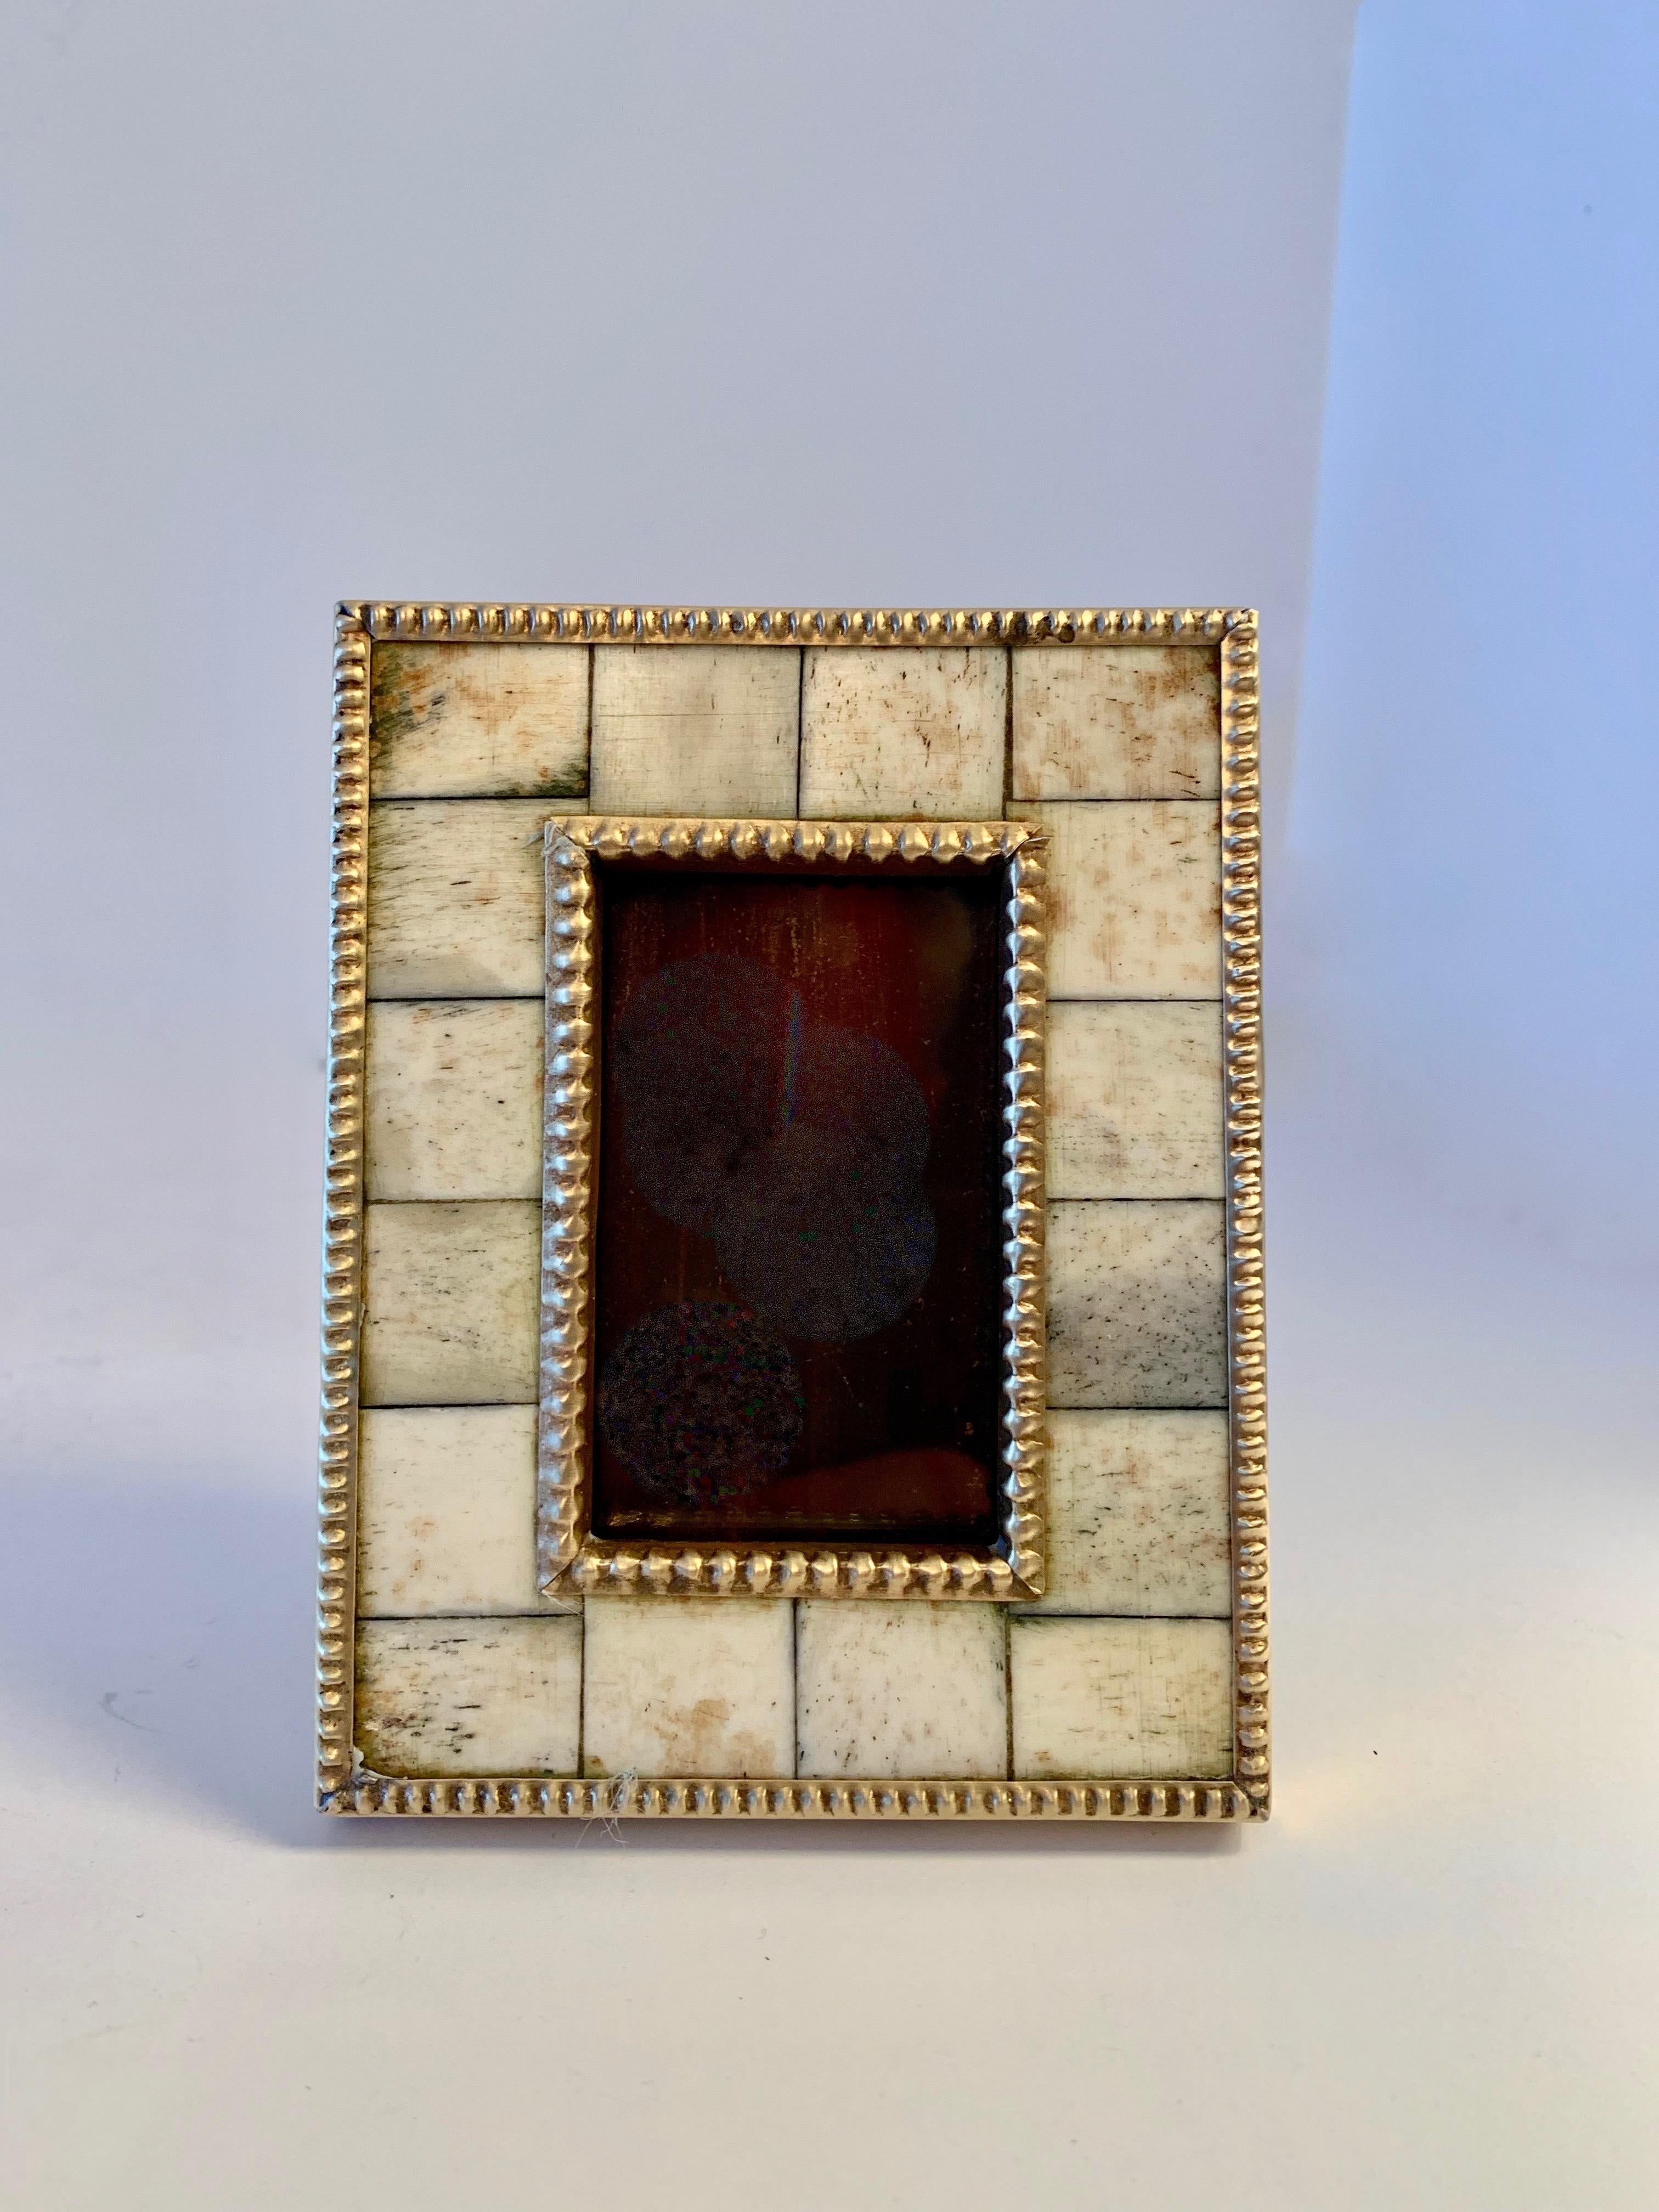 Photo frame of cut bone trimmed in pebbled brass
Image area is 1.5 x 2.5.